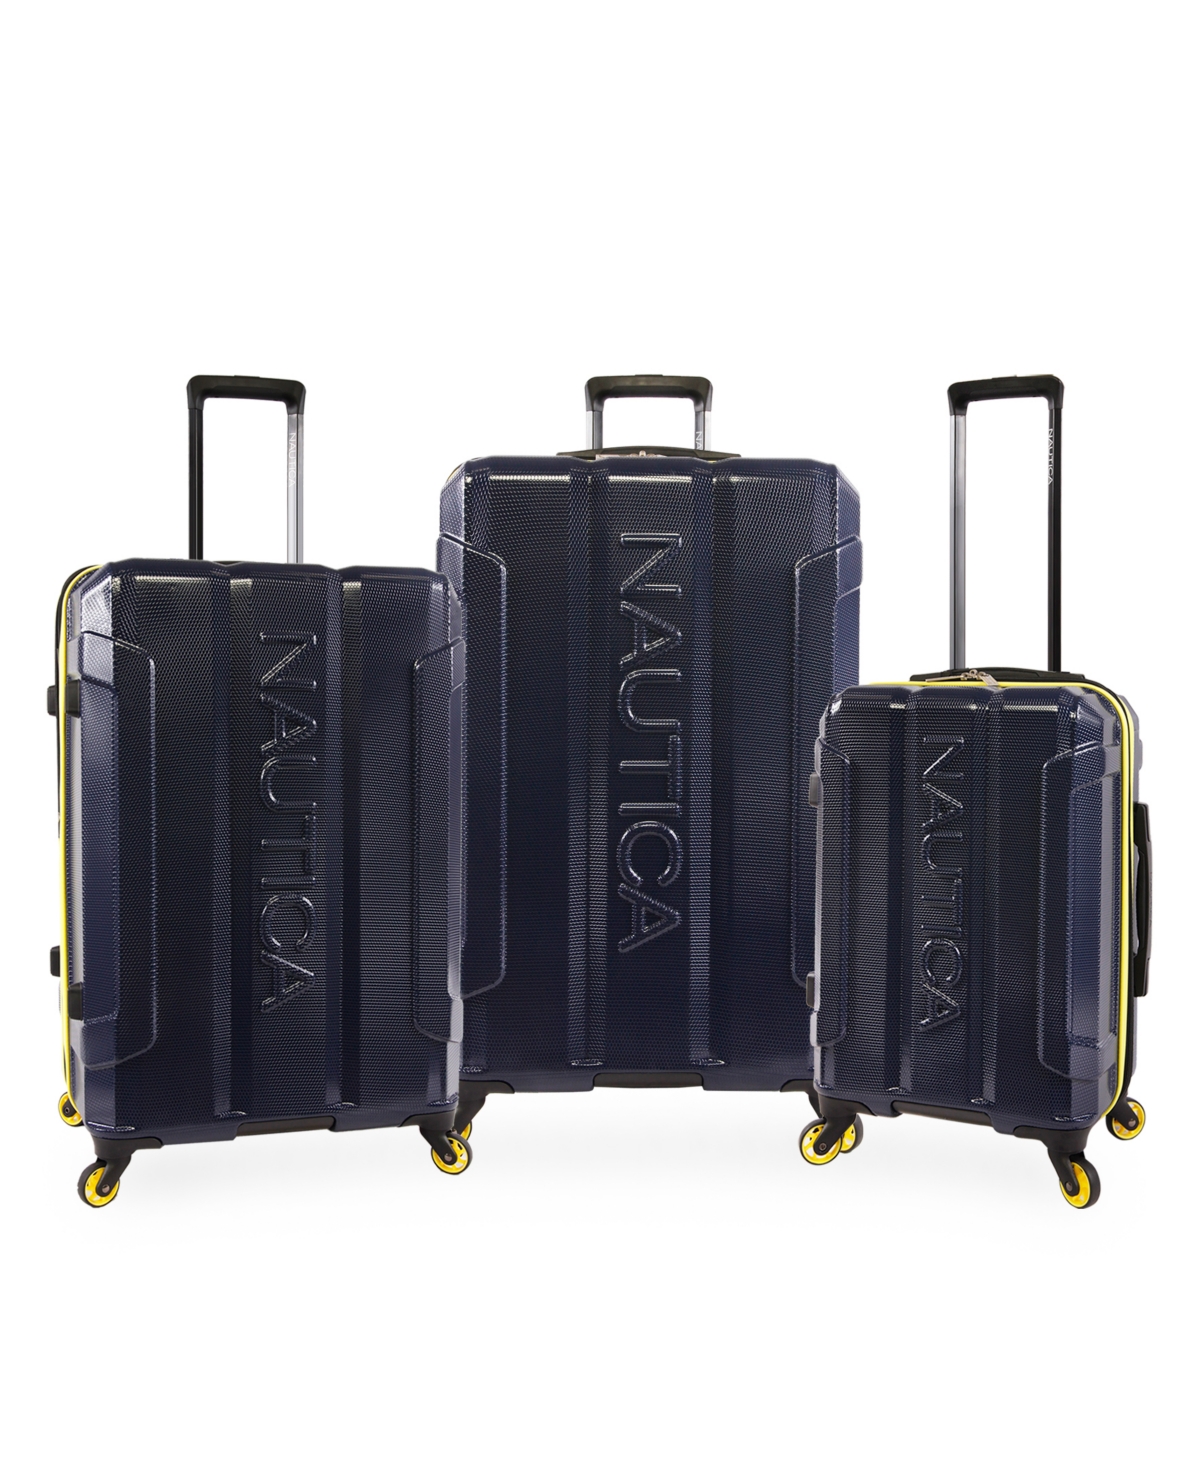 Nautica Maker Collection 3pc Hardside Luggage Set In Navy/yellow